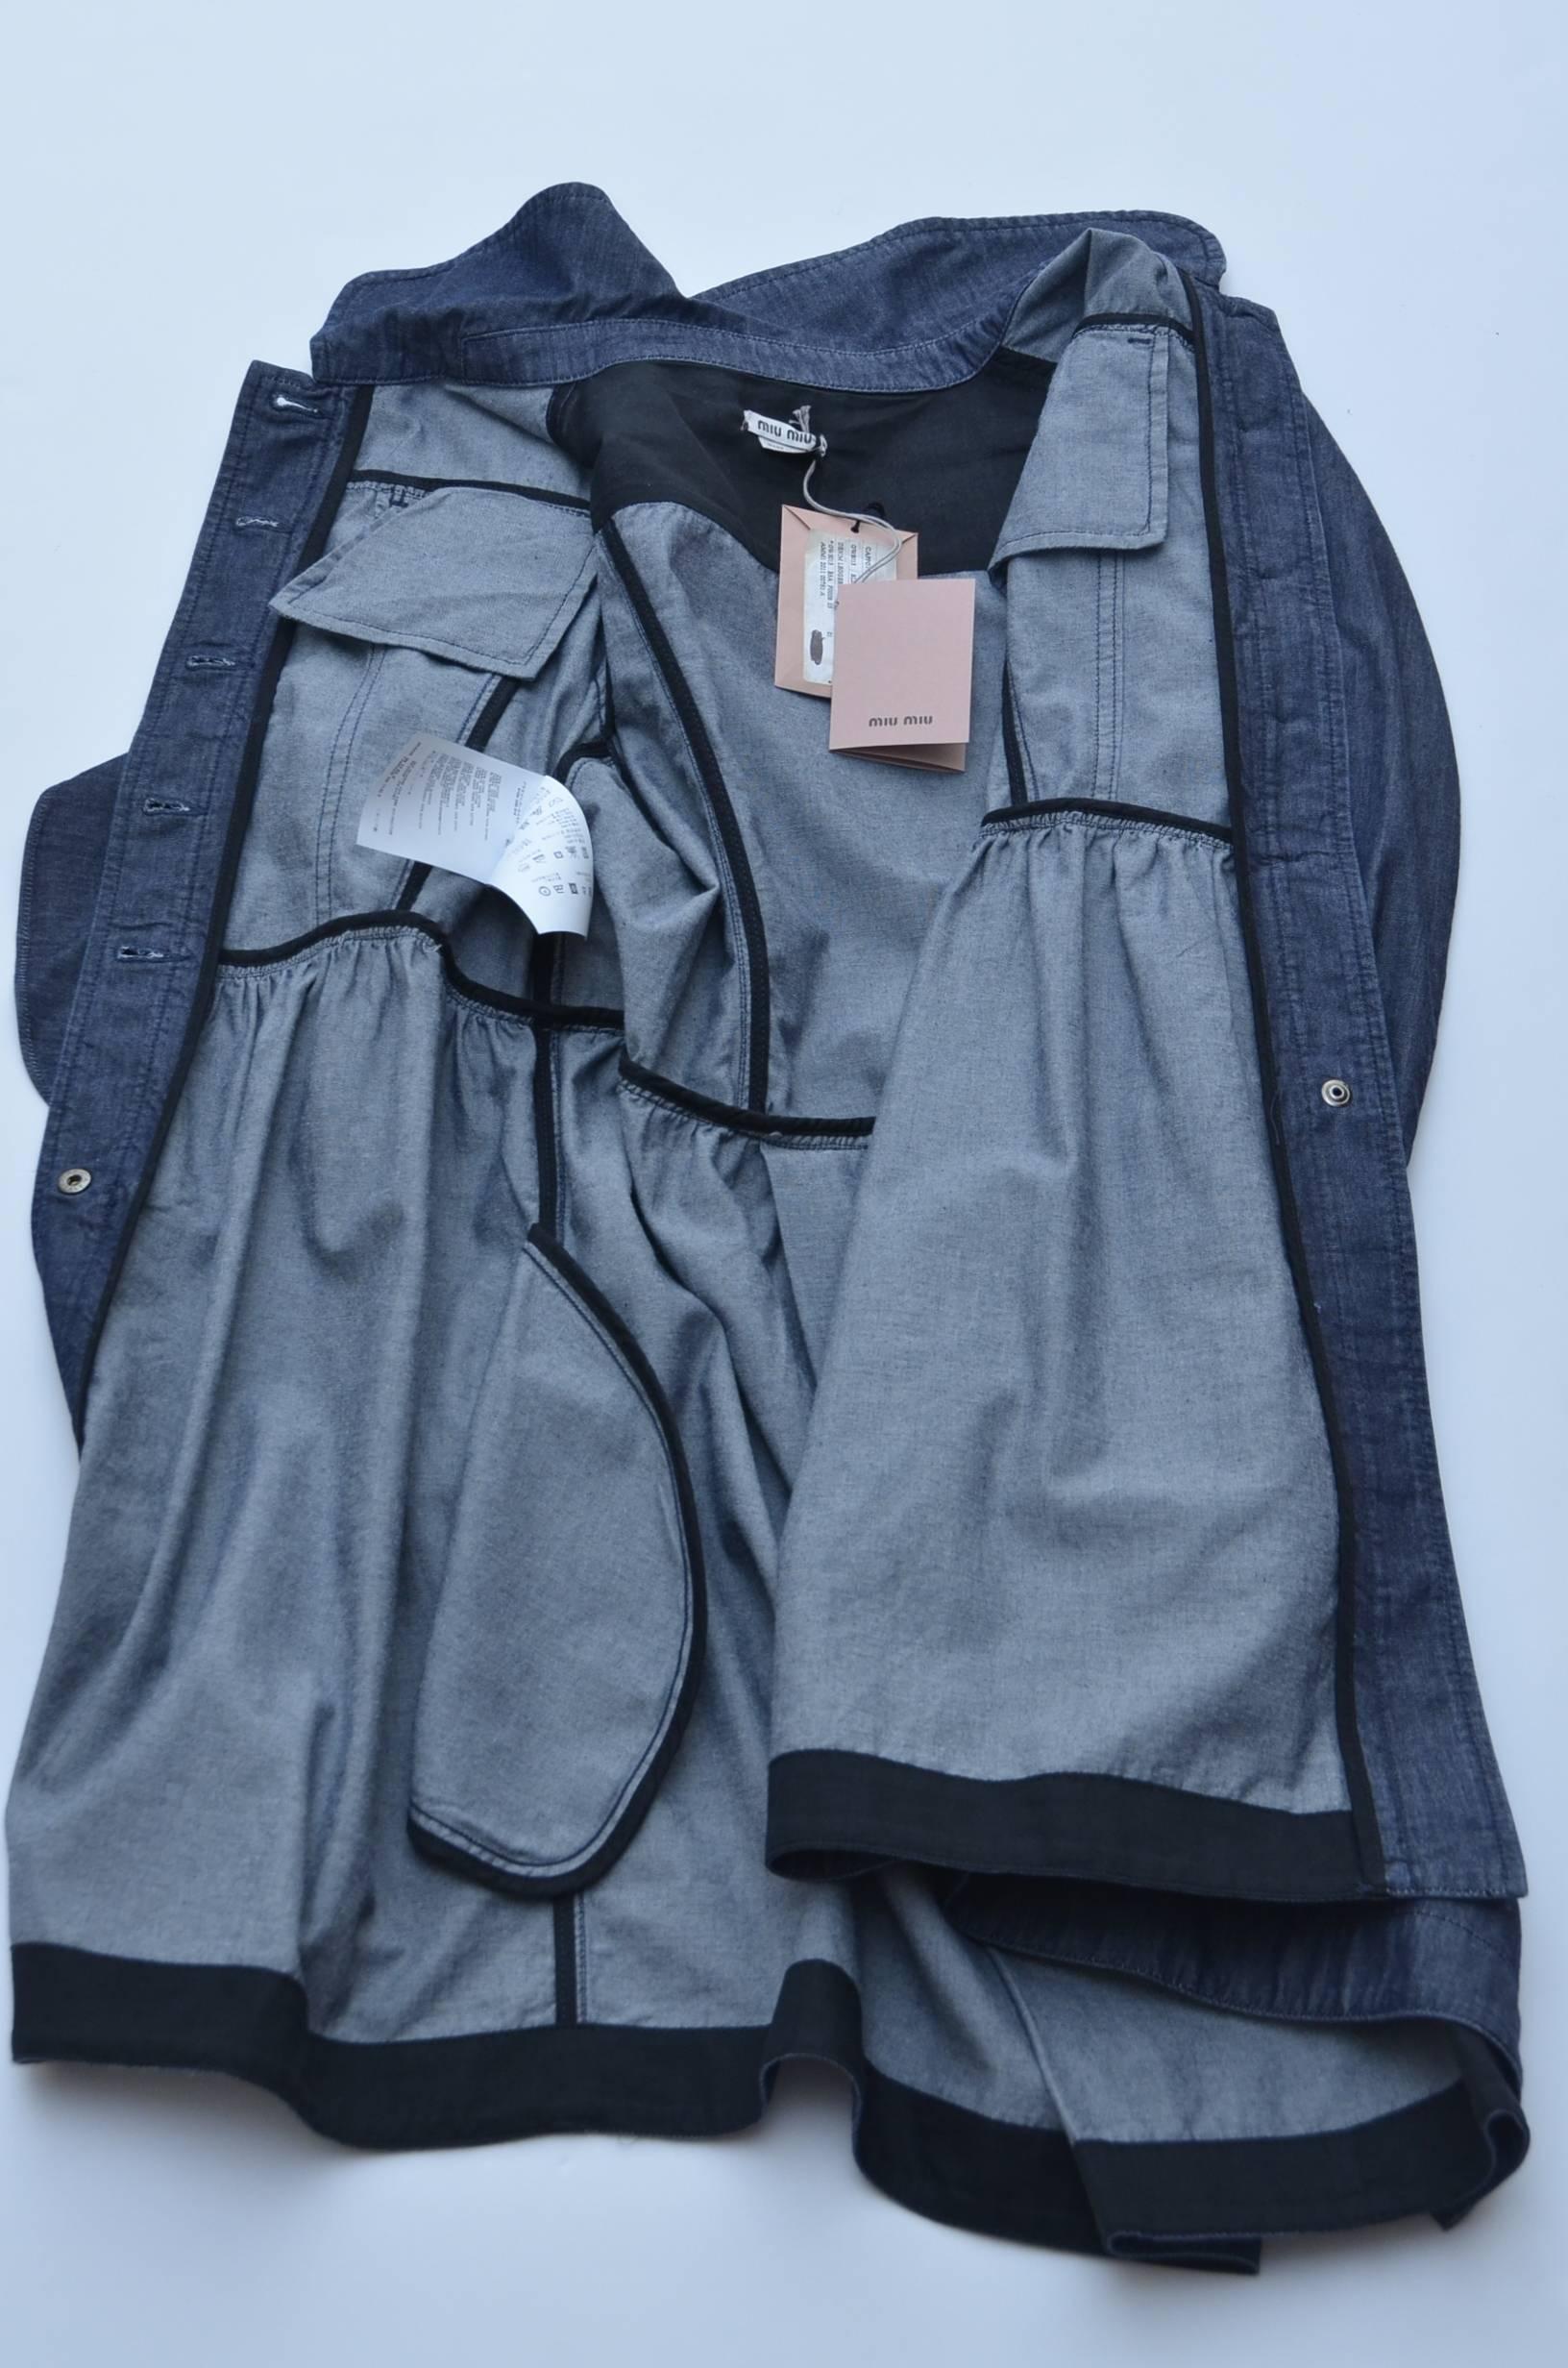 Miu Miu Denim Dress Coat  In New Condition For Sale In New York, NY